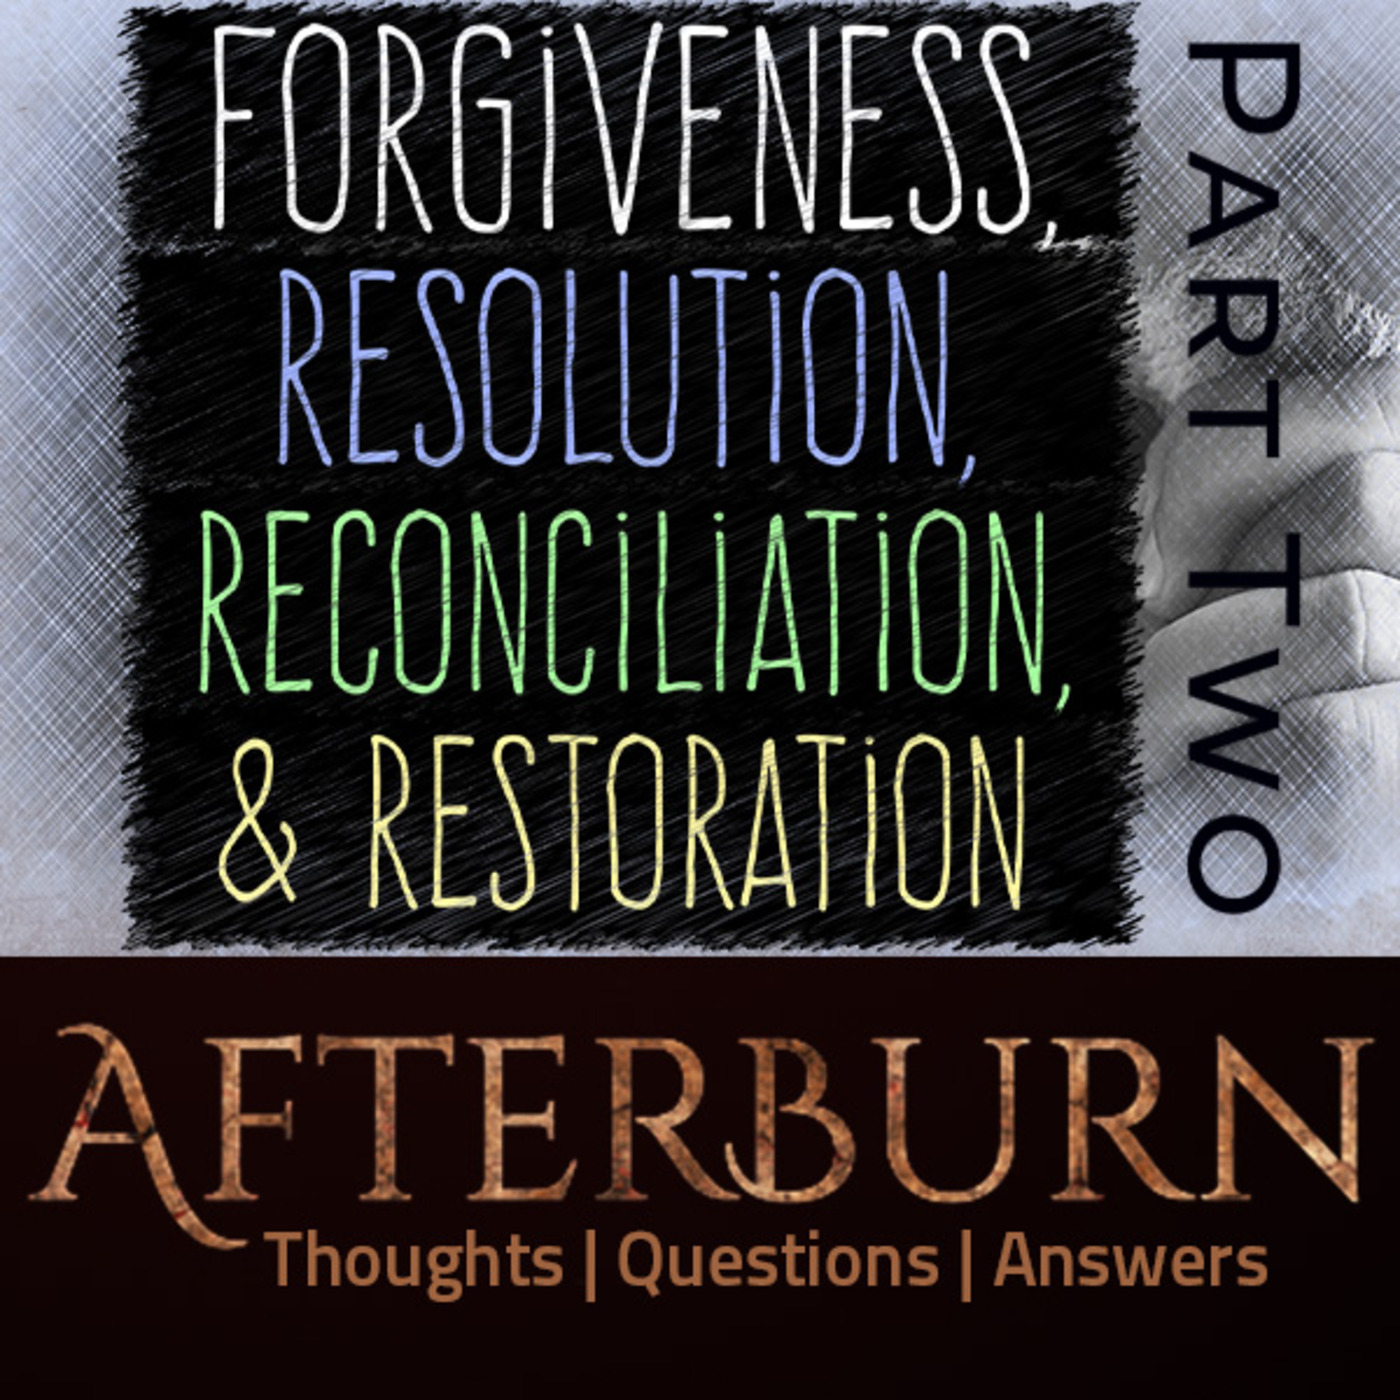 Afterburn: Thoughts, Q&A on Forgiveness, Resolution, Reconciliation & Restoration - Part 2